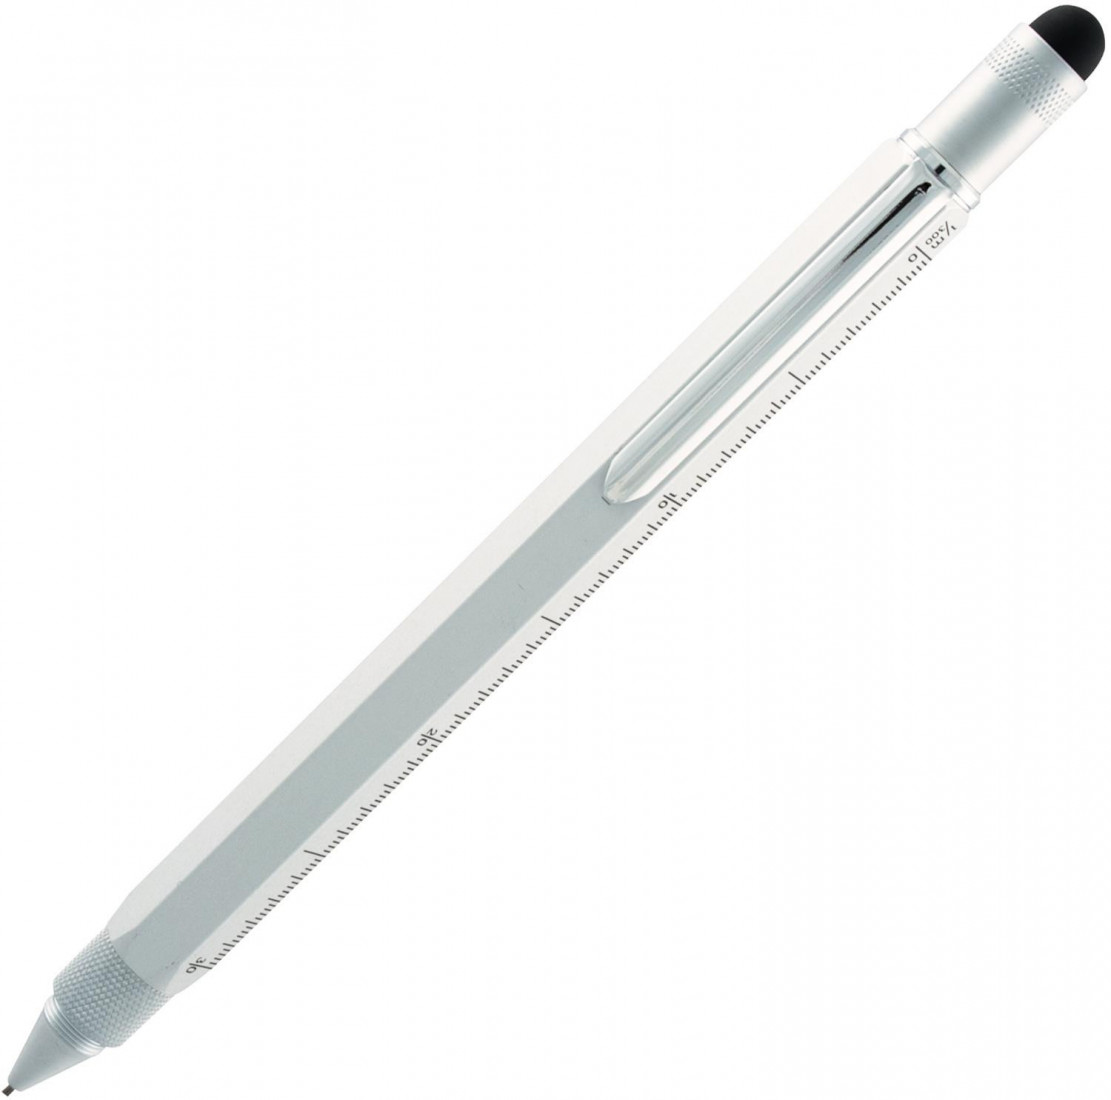 ONE TOUCH STYLUS 9 FUNCTION TOOL PENCIL SILVER MONTEVERDE